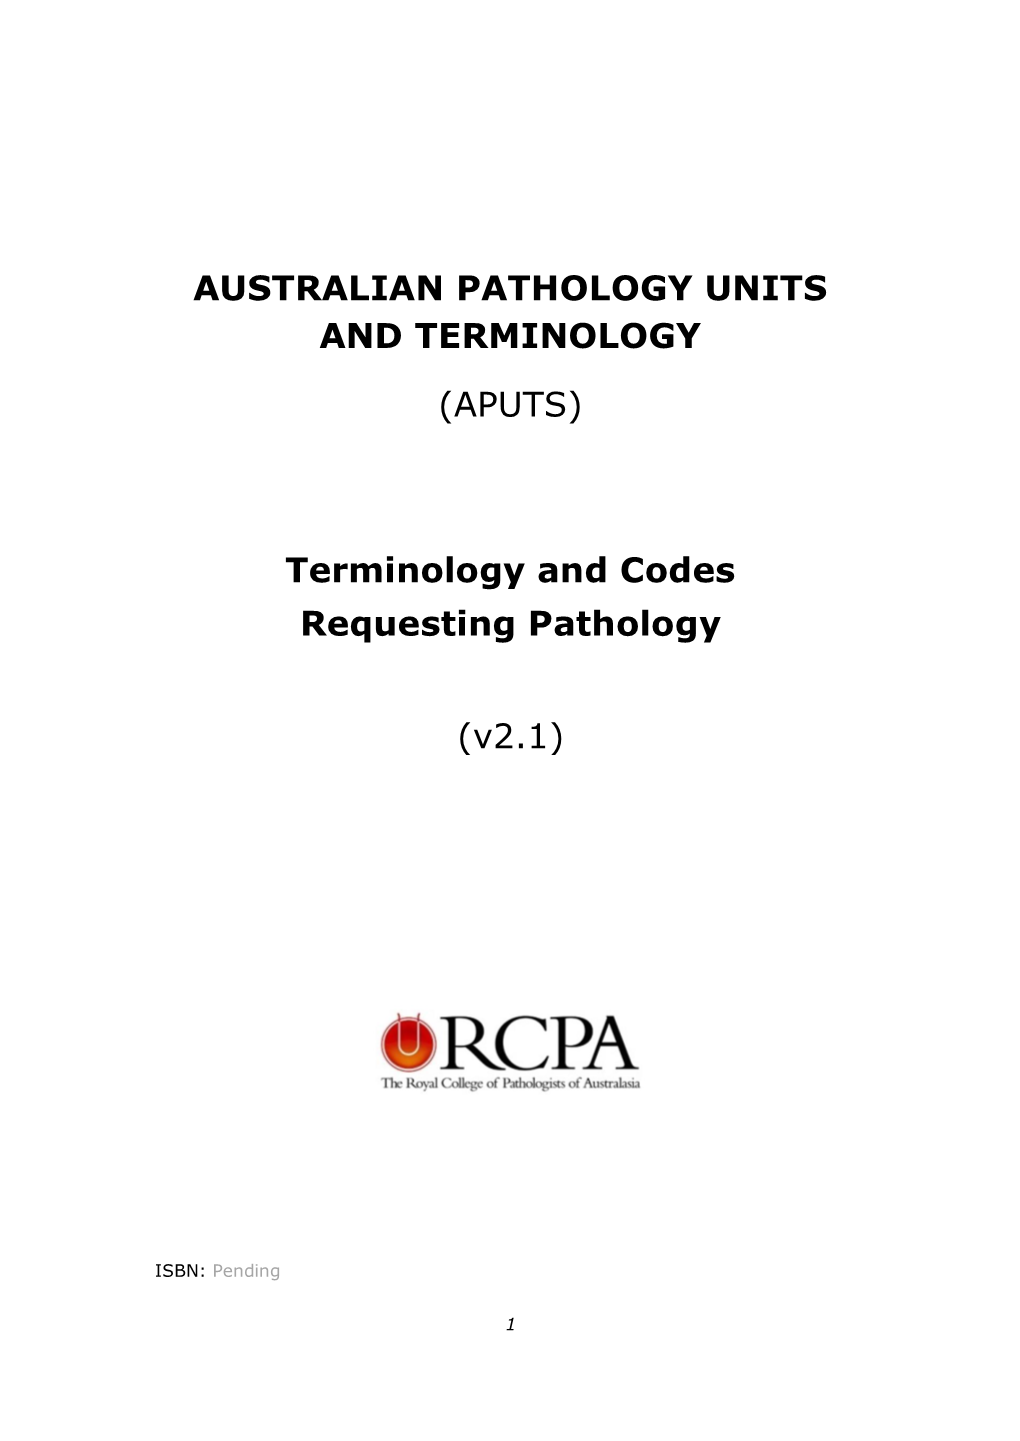 APUTS) Terminology and Codes Requesting Pathology (V2.1